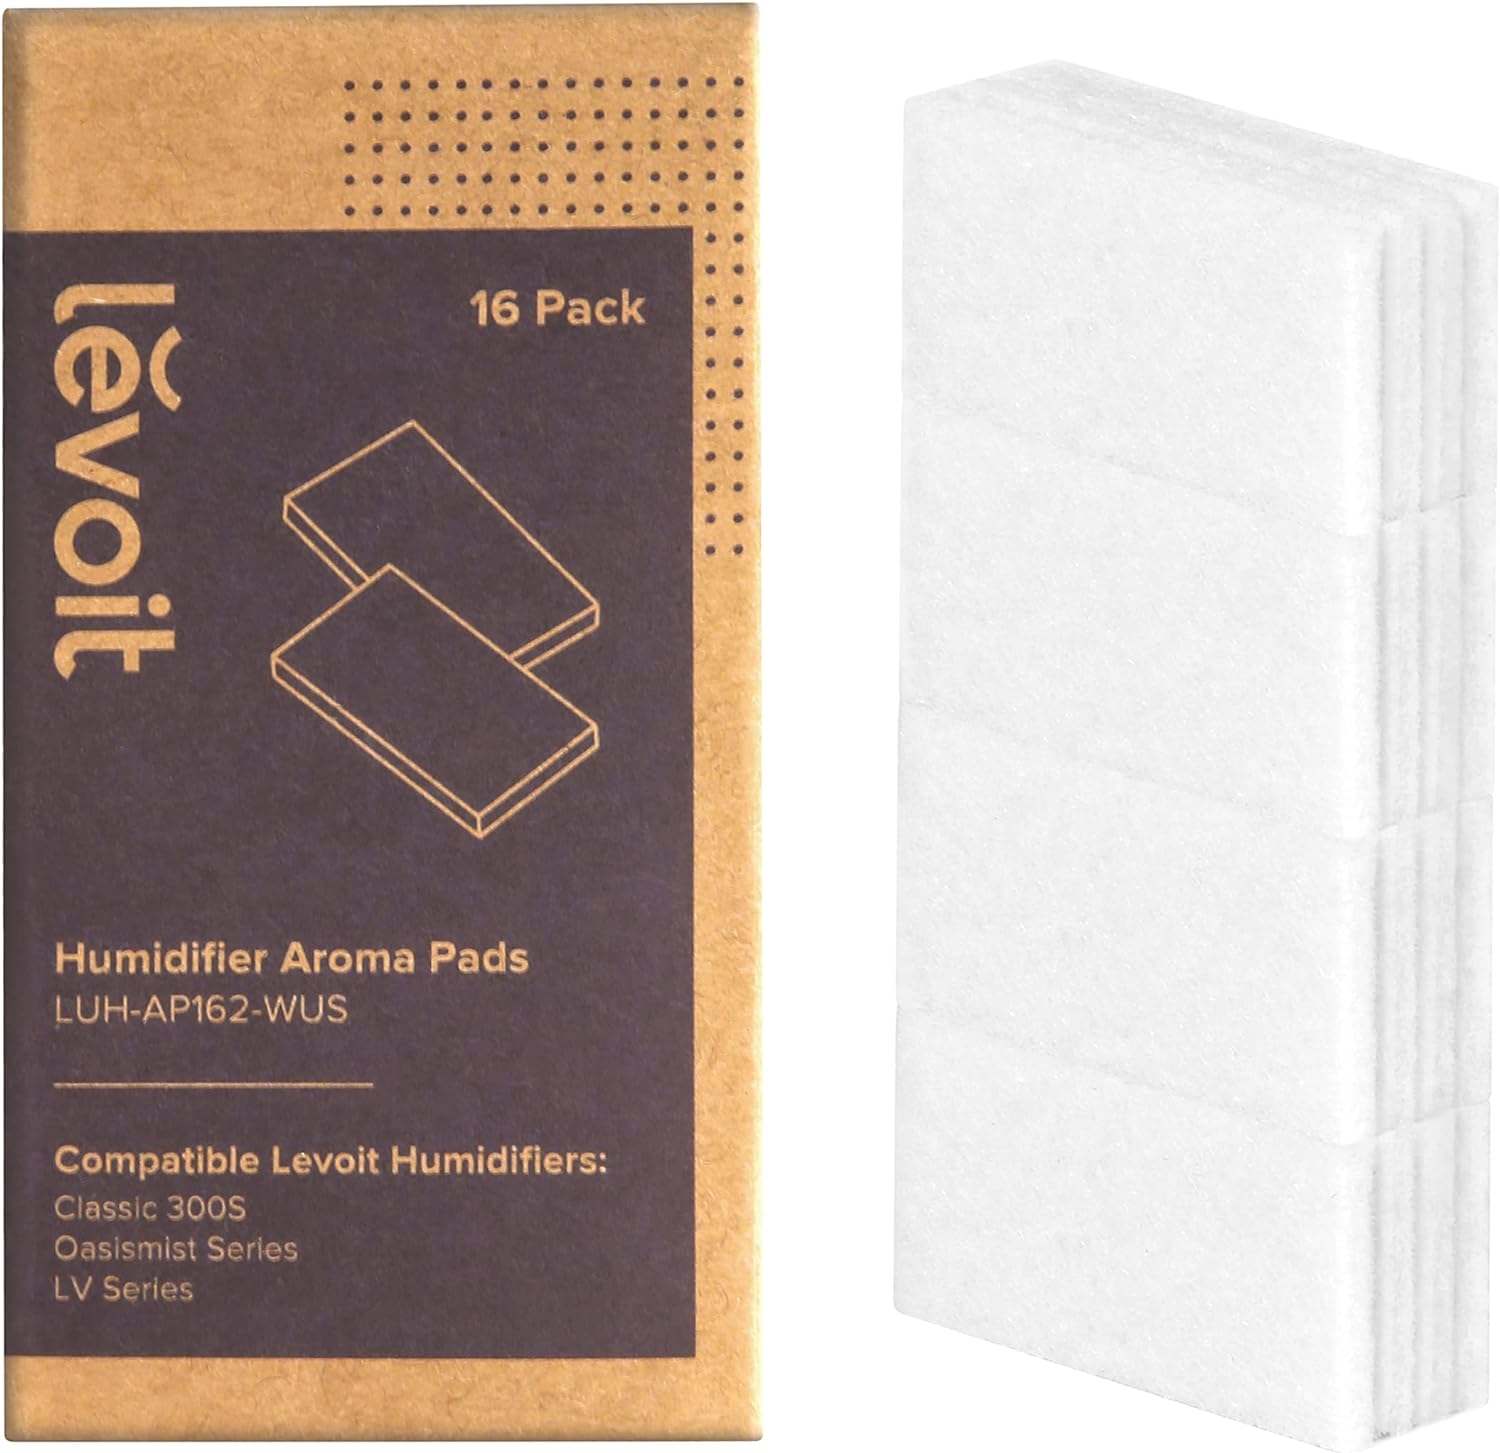 LEVOIT Aroma Pads 16 Pack, Humidifier Replacement Filters, Compatible with LV600S, Classic300S, LV600HH, OasisMist450S, Make The Fragrance Stronger and Longer Duration, White